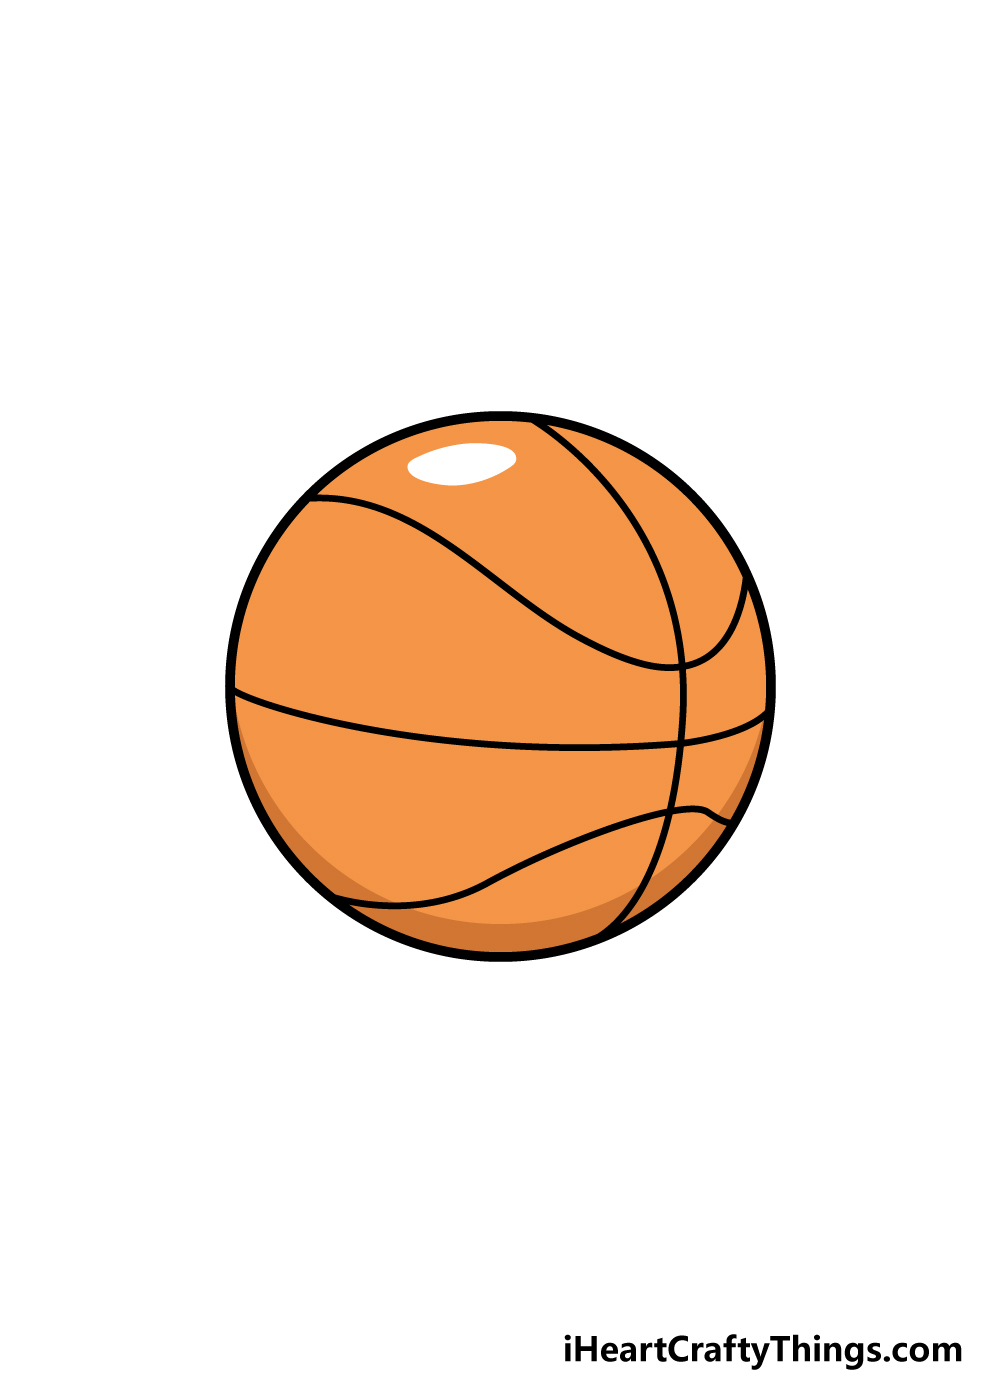 Basketball Drawing - How To Draw A Basketball Step By Step